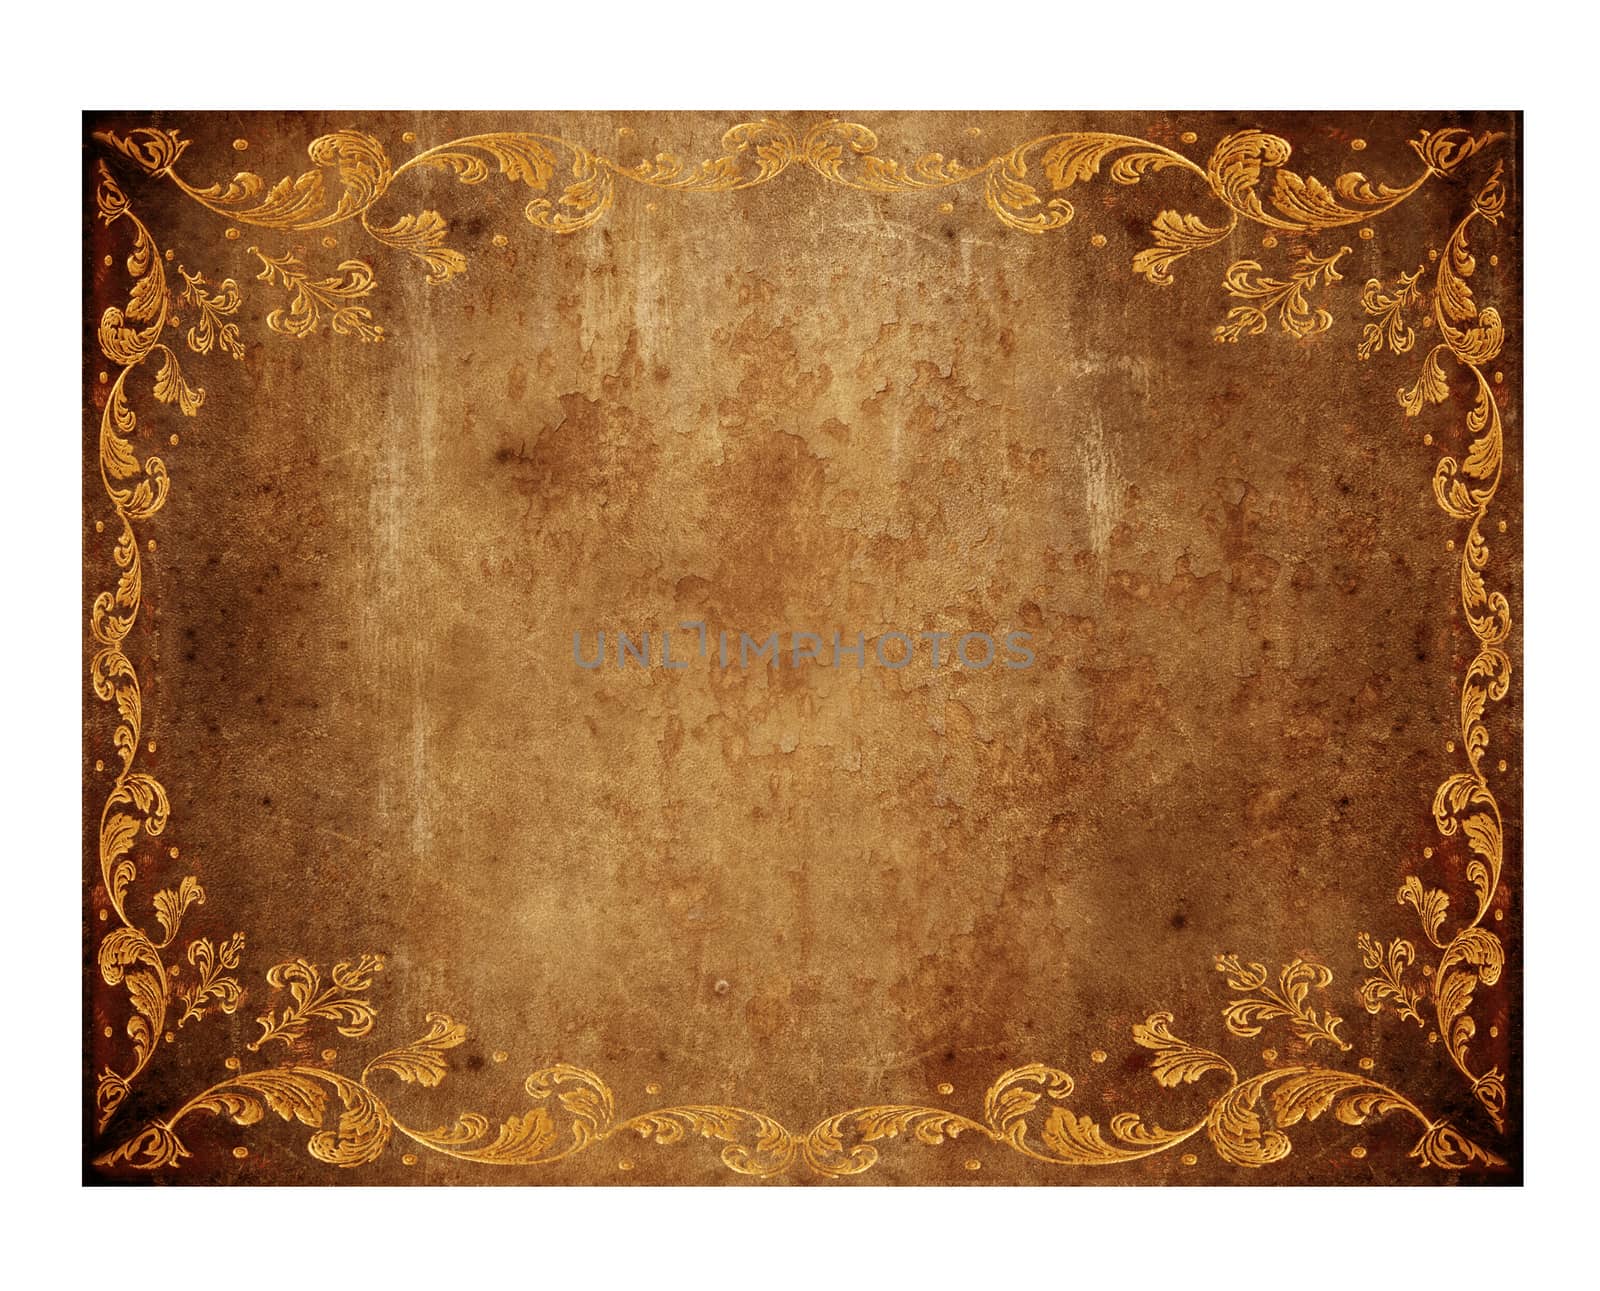 brown leather background with golden floral decorations